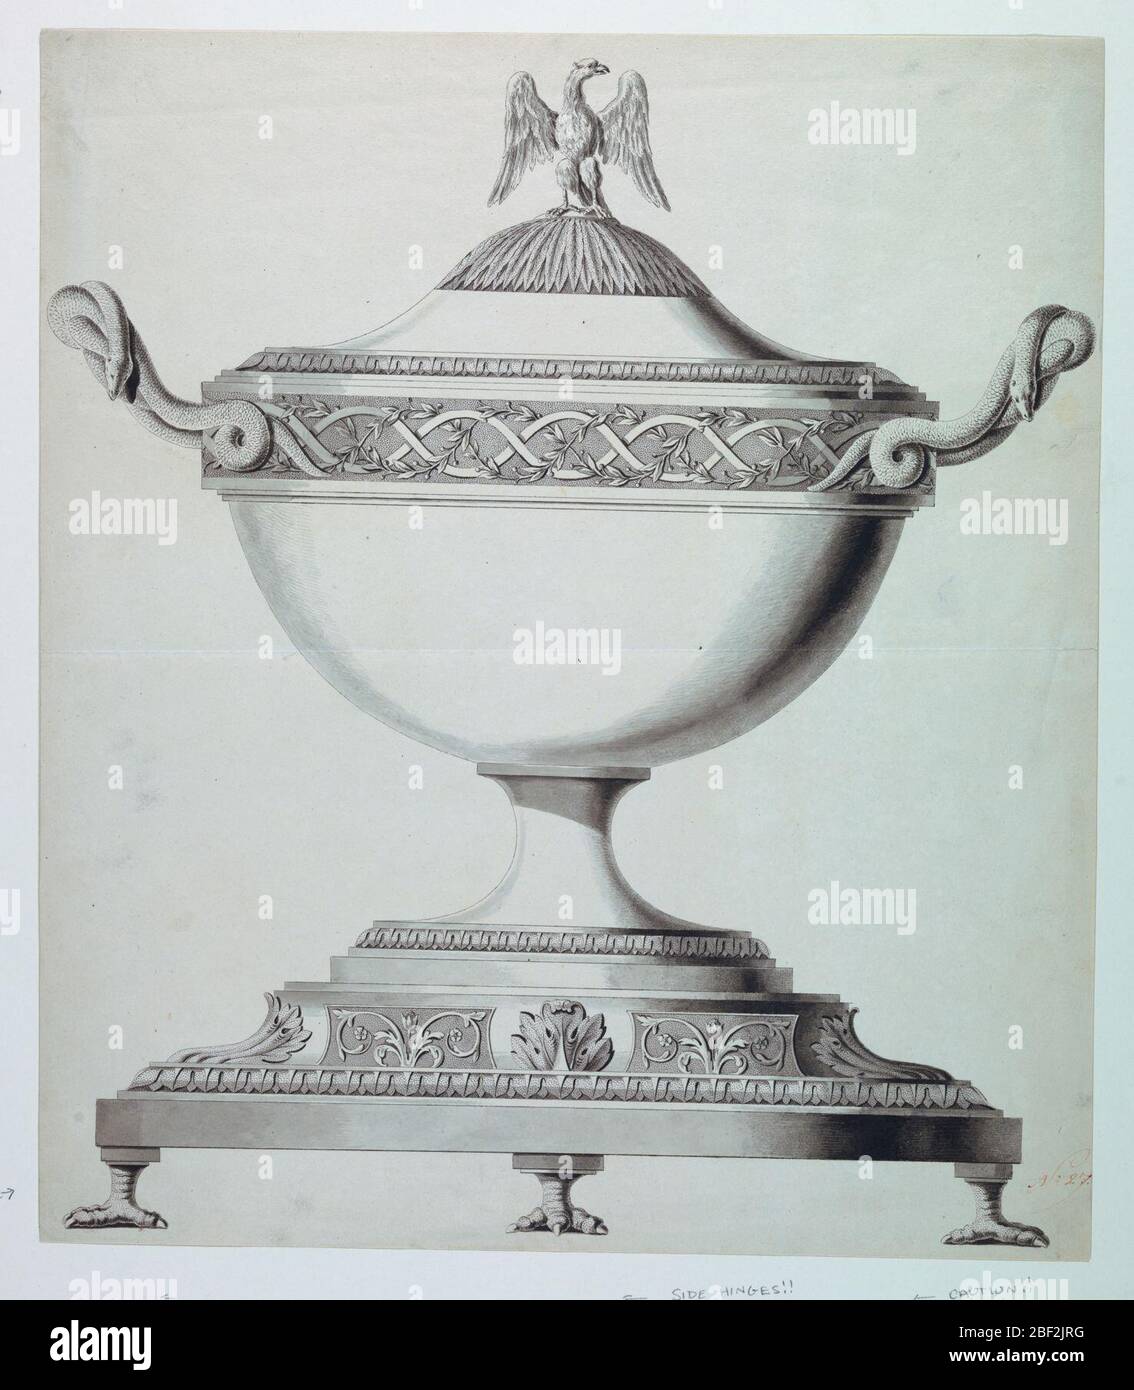 Design for a Tureen. The vessel is banded by an interweaving vine and ribbon meader. The finial is a spread eagle and coiled snakes form the handles. The base rests on birds' feet and is decorated with acanthus leaves and flowers. Stock Photo